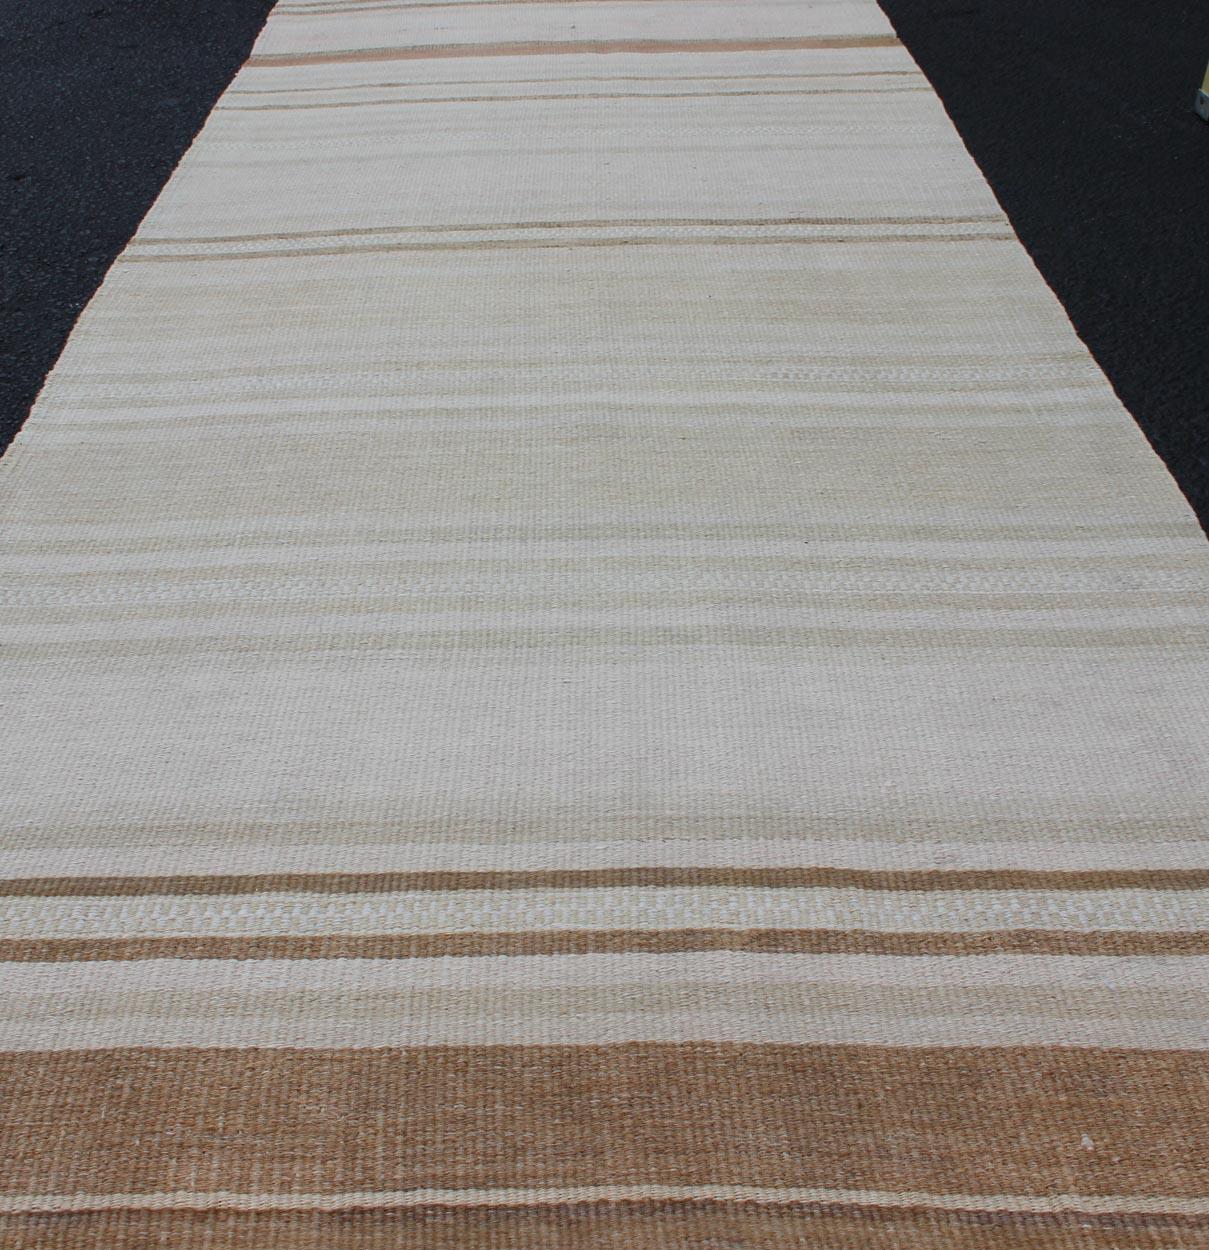 Wool Vintage Turkish Kilim Runner with Stripes in Light Brown and Neutral Tones For Sale